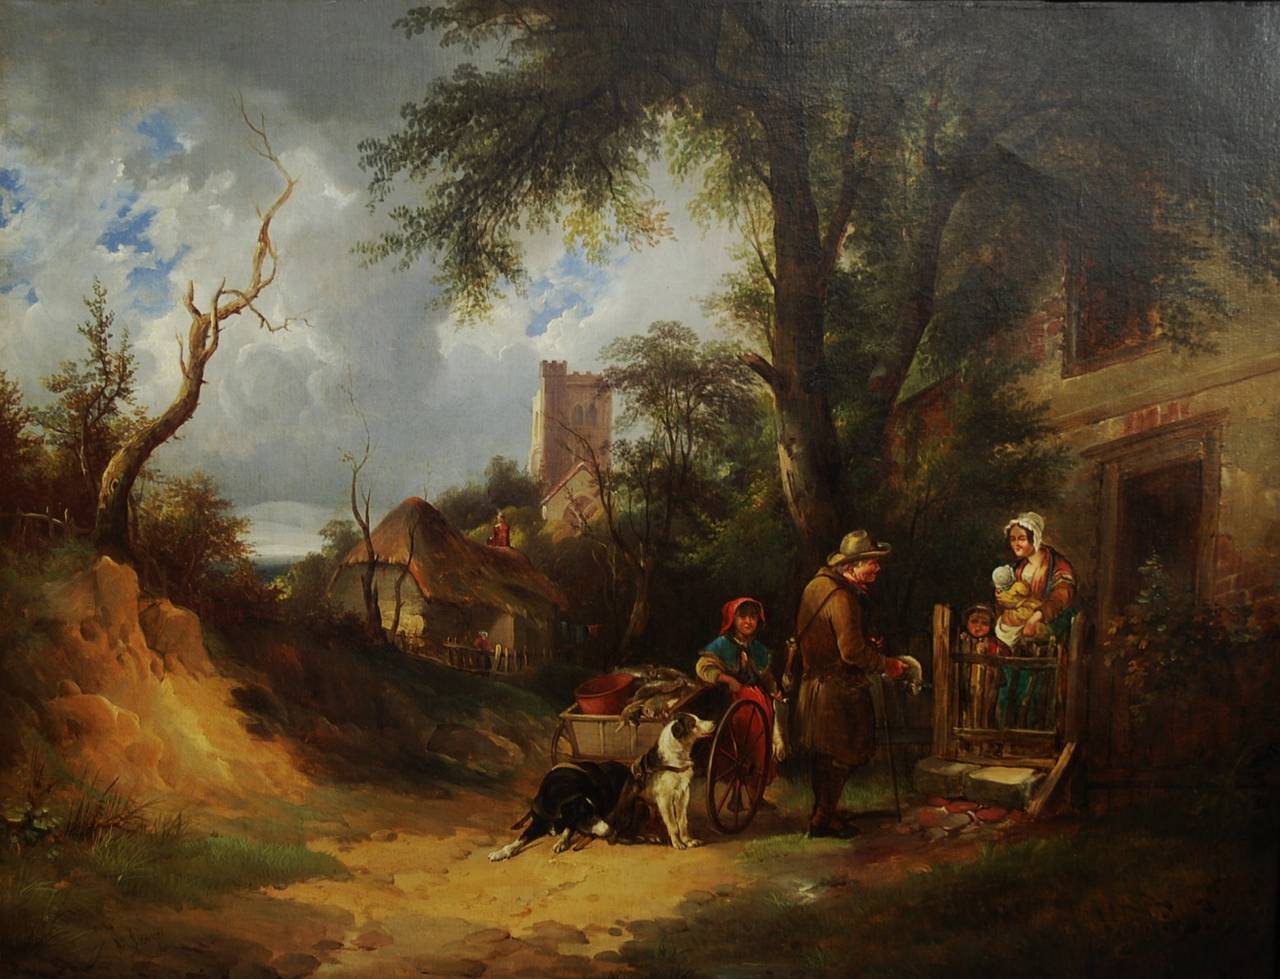 A very fine 19th century oil on canvas of 'The Rabbit Seller' by William Shayer the Elder (1787-1879), signed Wm Shayer bottom left.

This painting depicts the rabbit seller trying to sell his rabbits to a woman outside her house with her